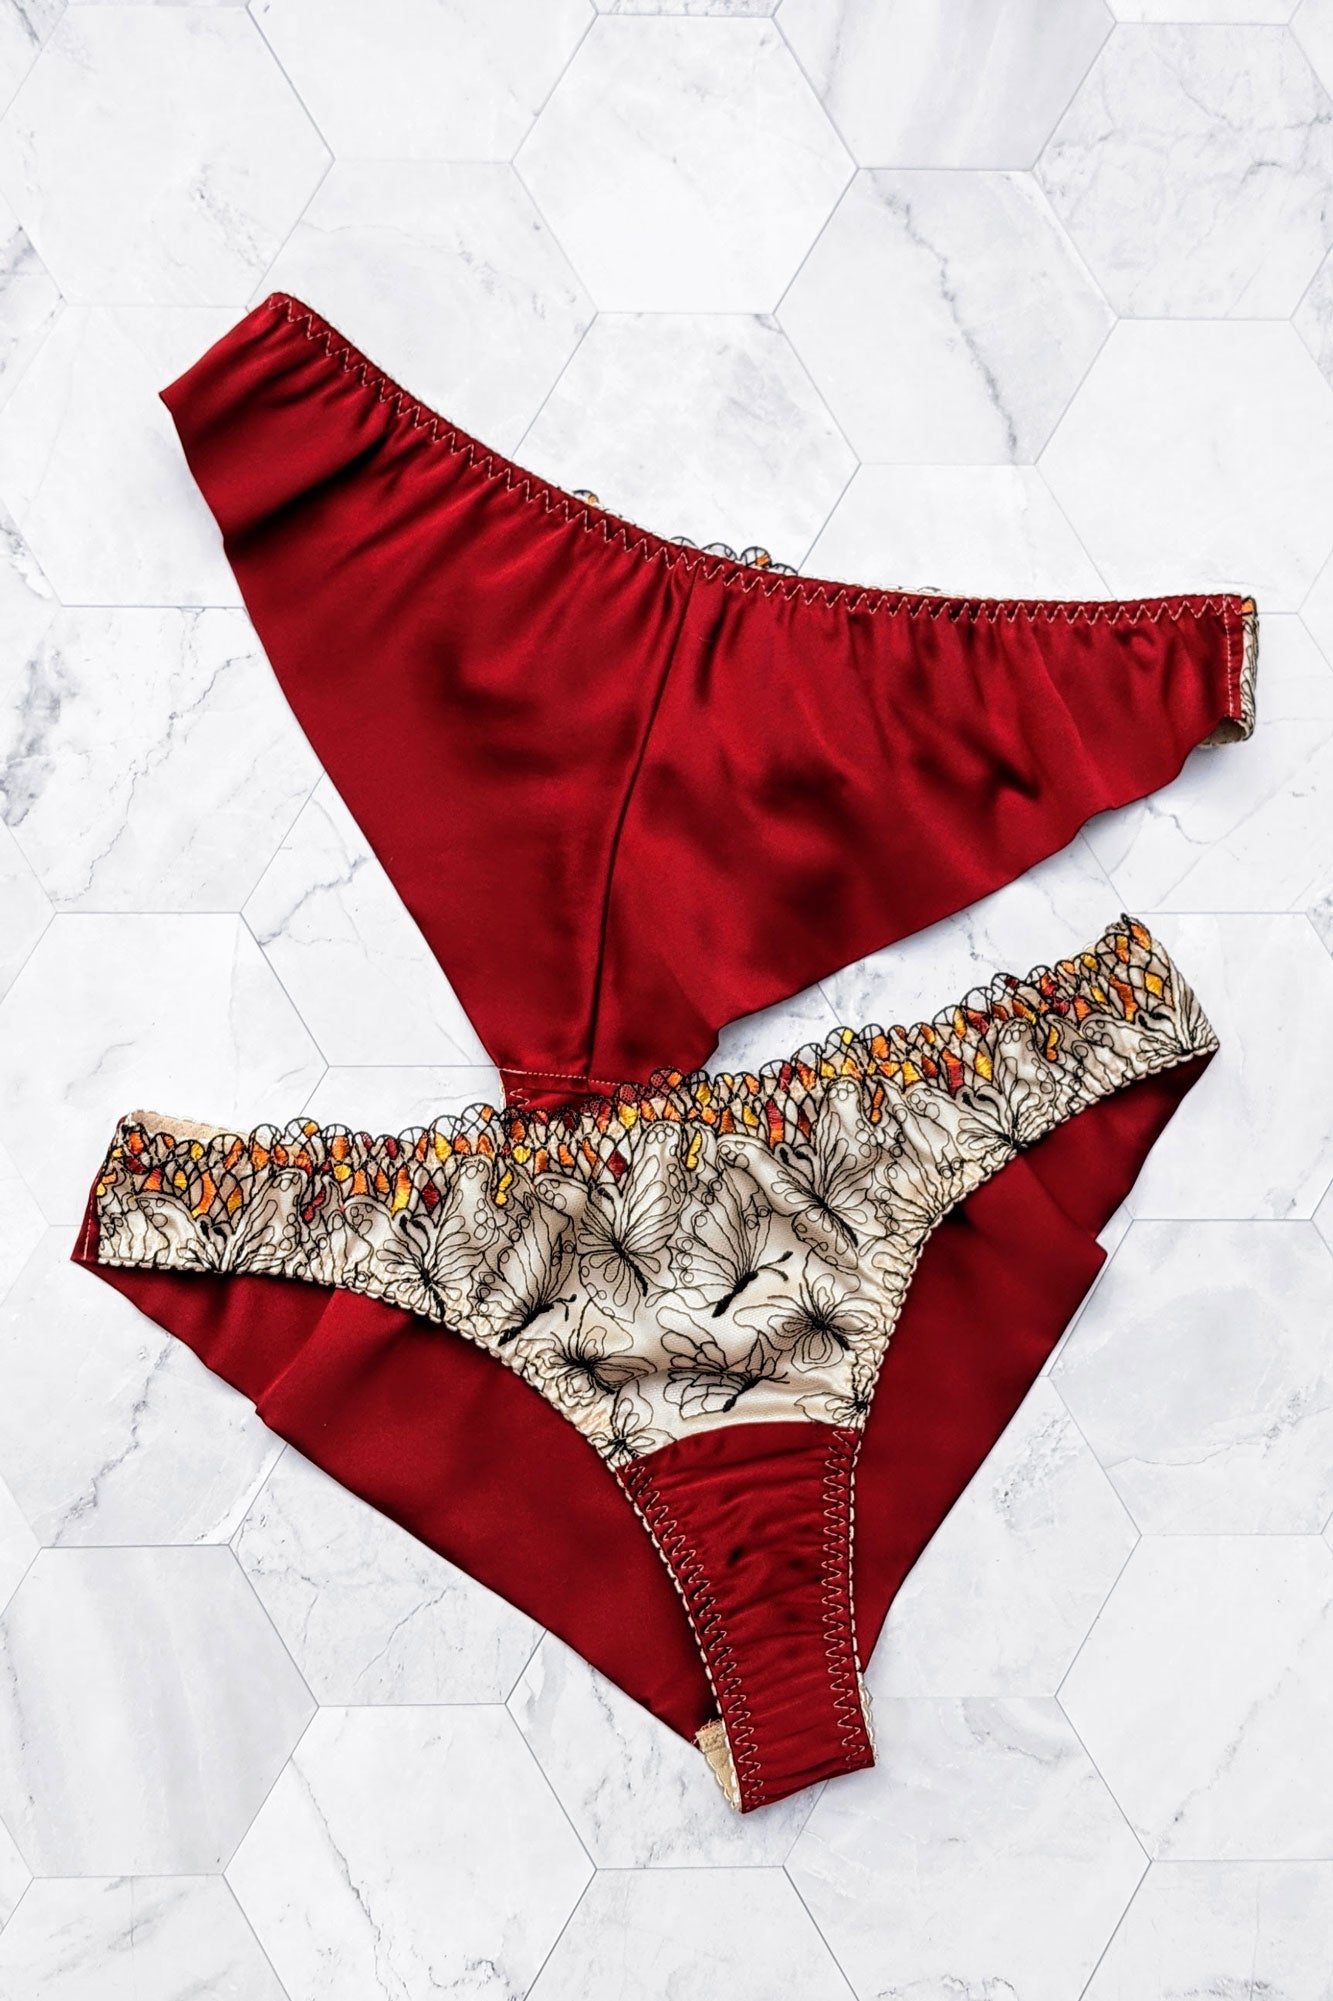 Red silk knickers and embroidered panties